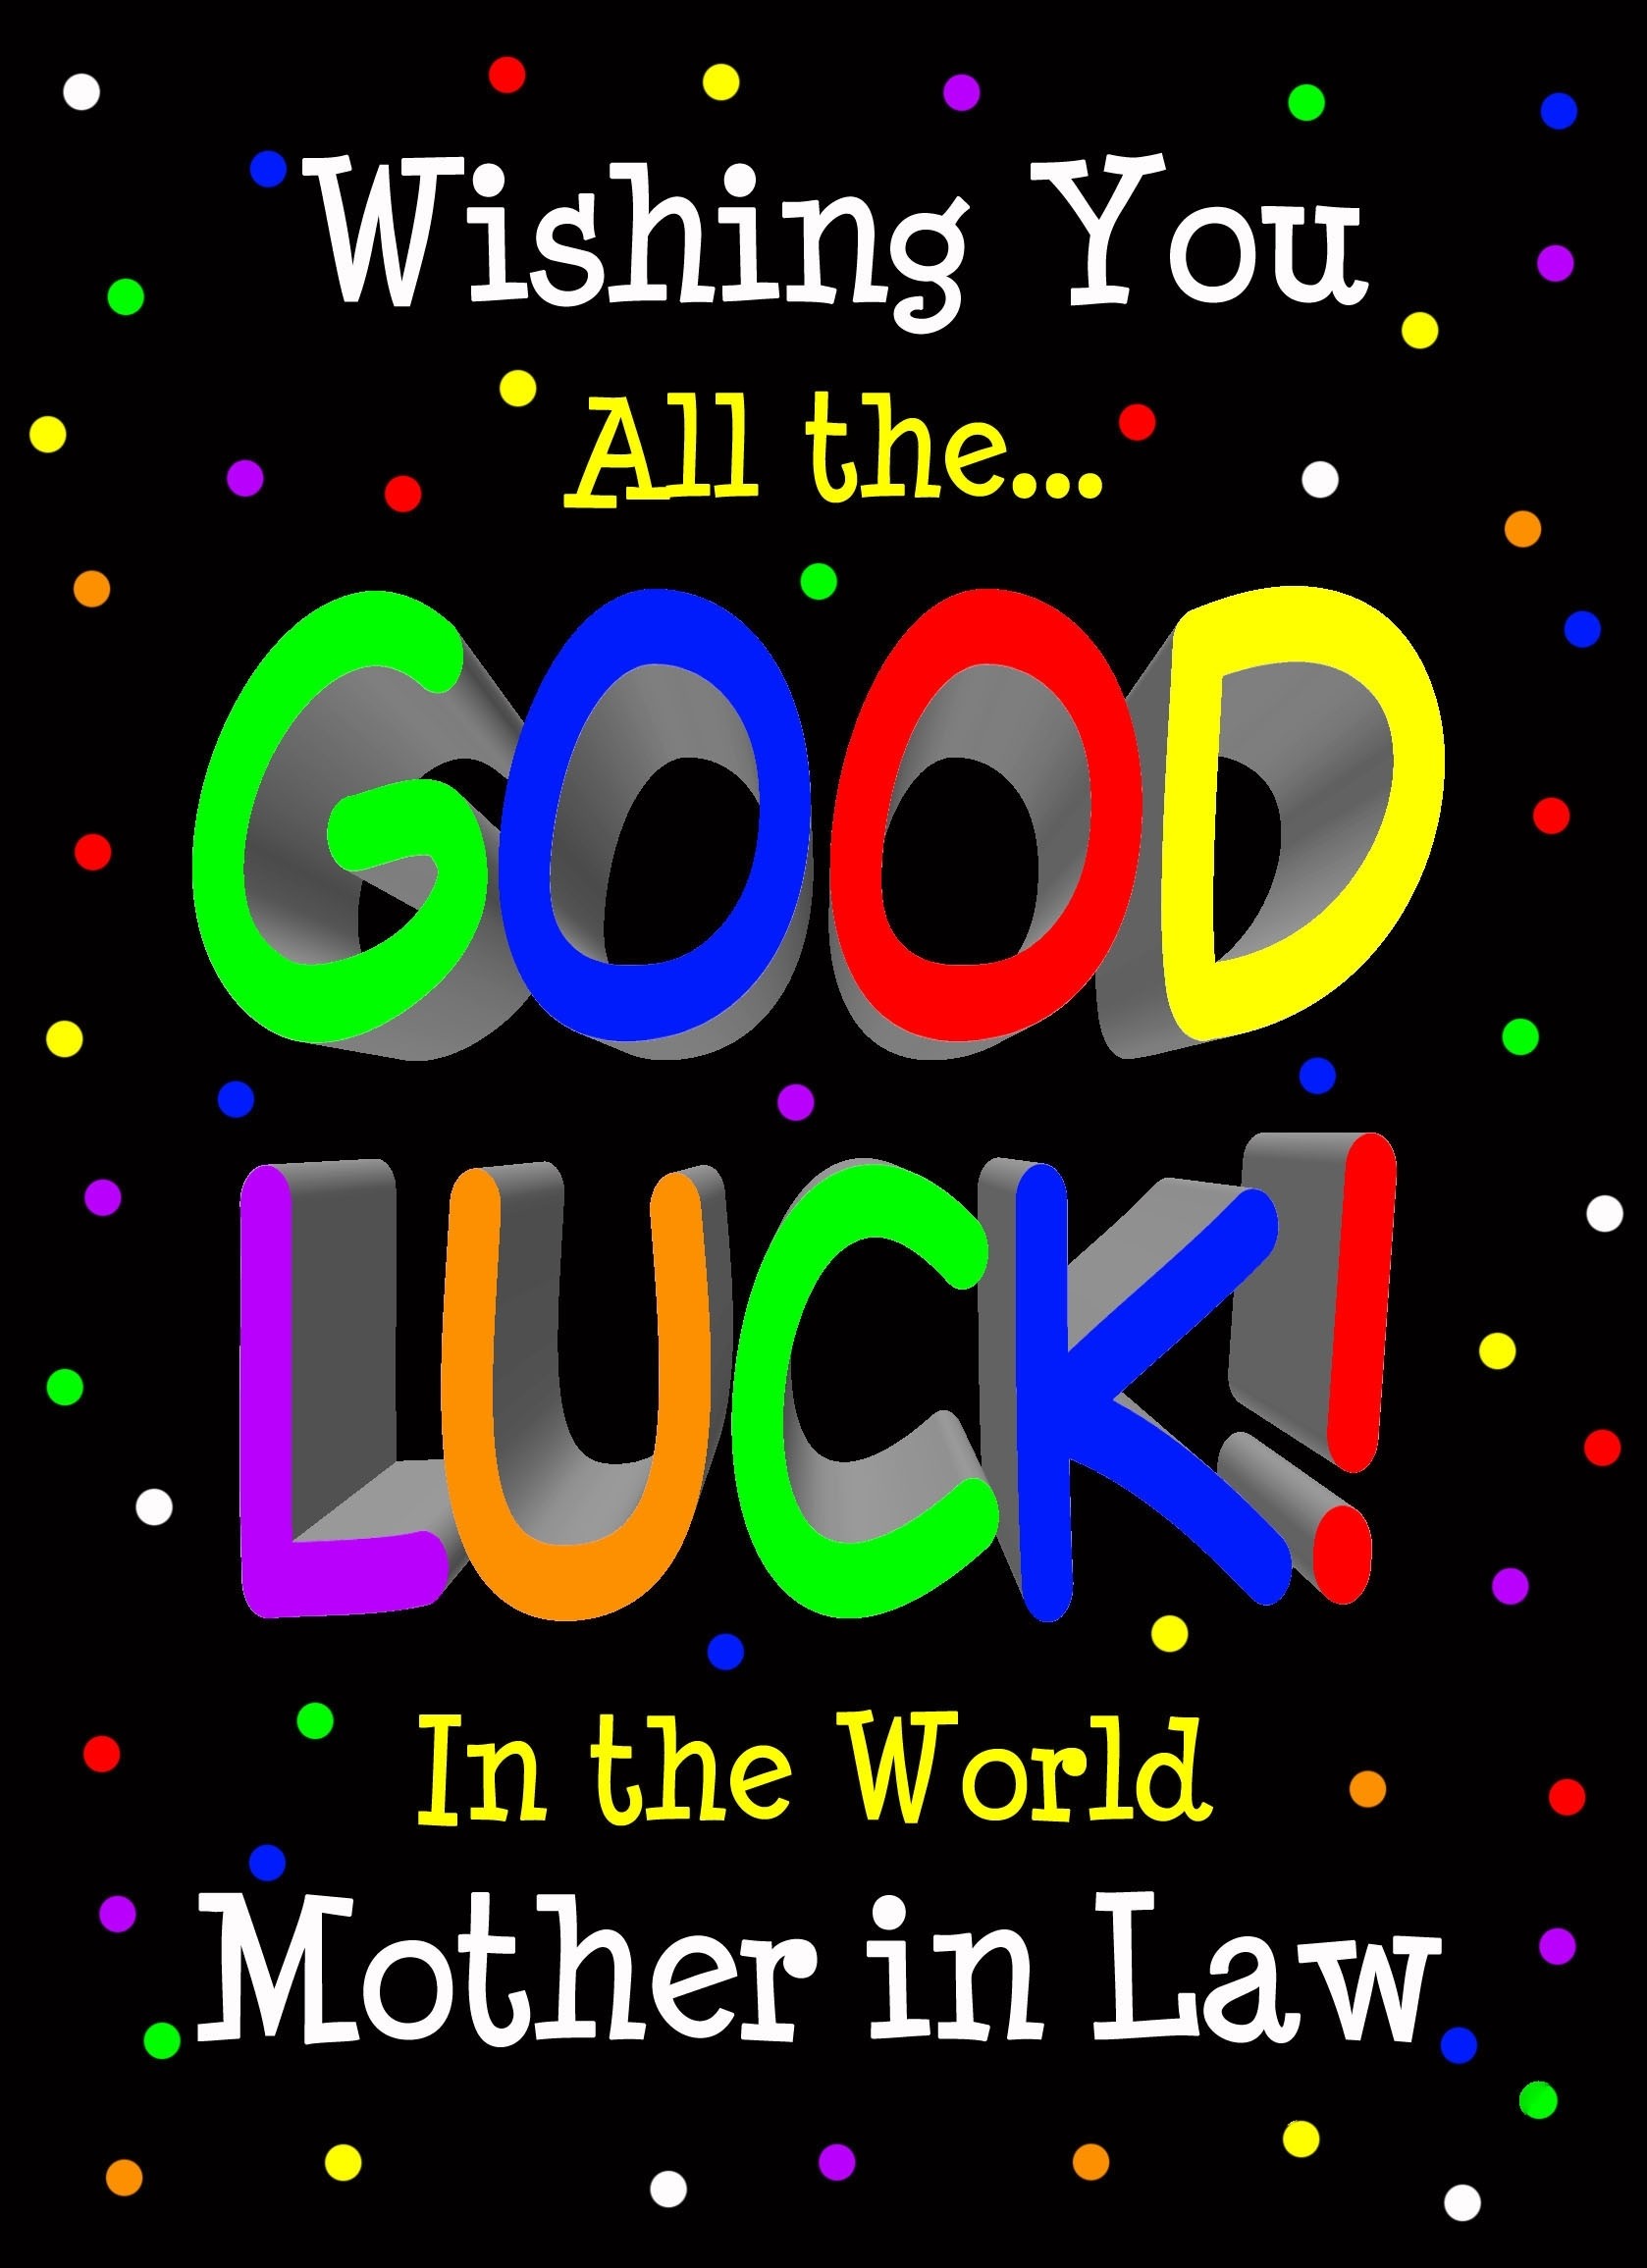 Good Luck Card for Mother in Law (Black) 